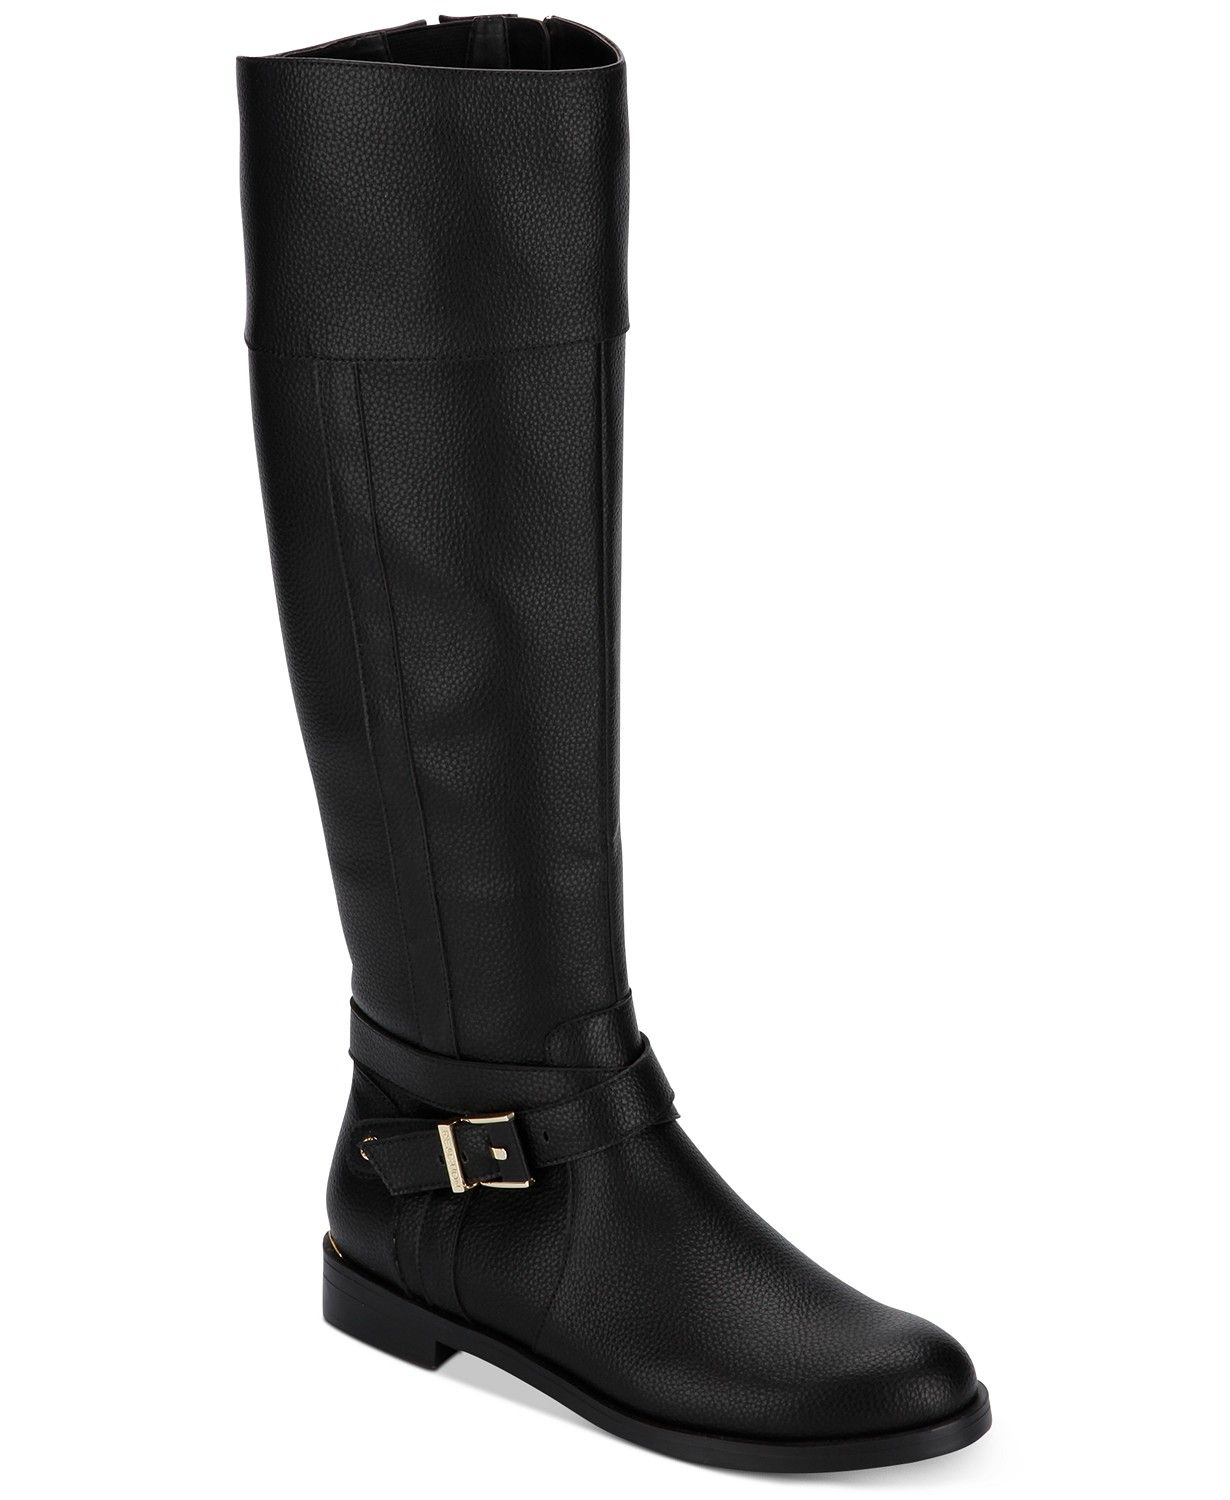 Kenneth Cole Reaction Women's Wind Riding Boots & Reviews - Boots - Shoes - Macy's | Macys (US)